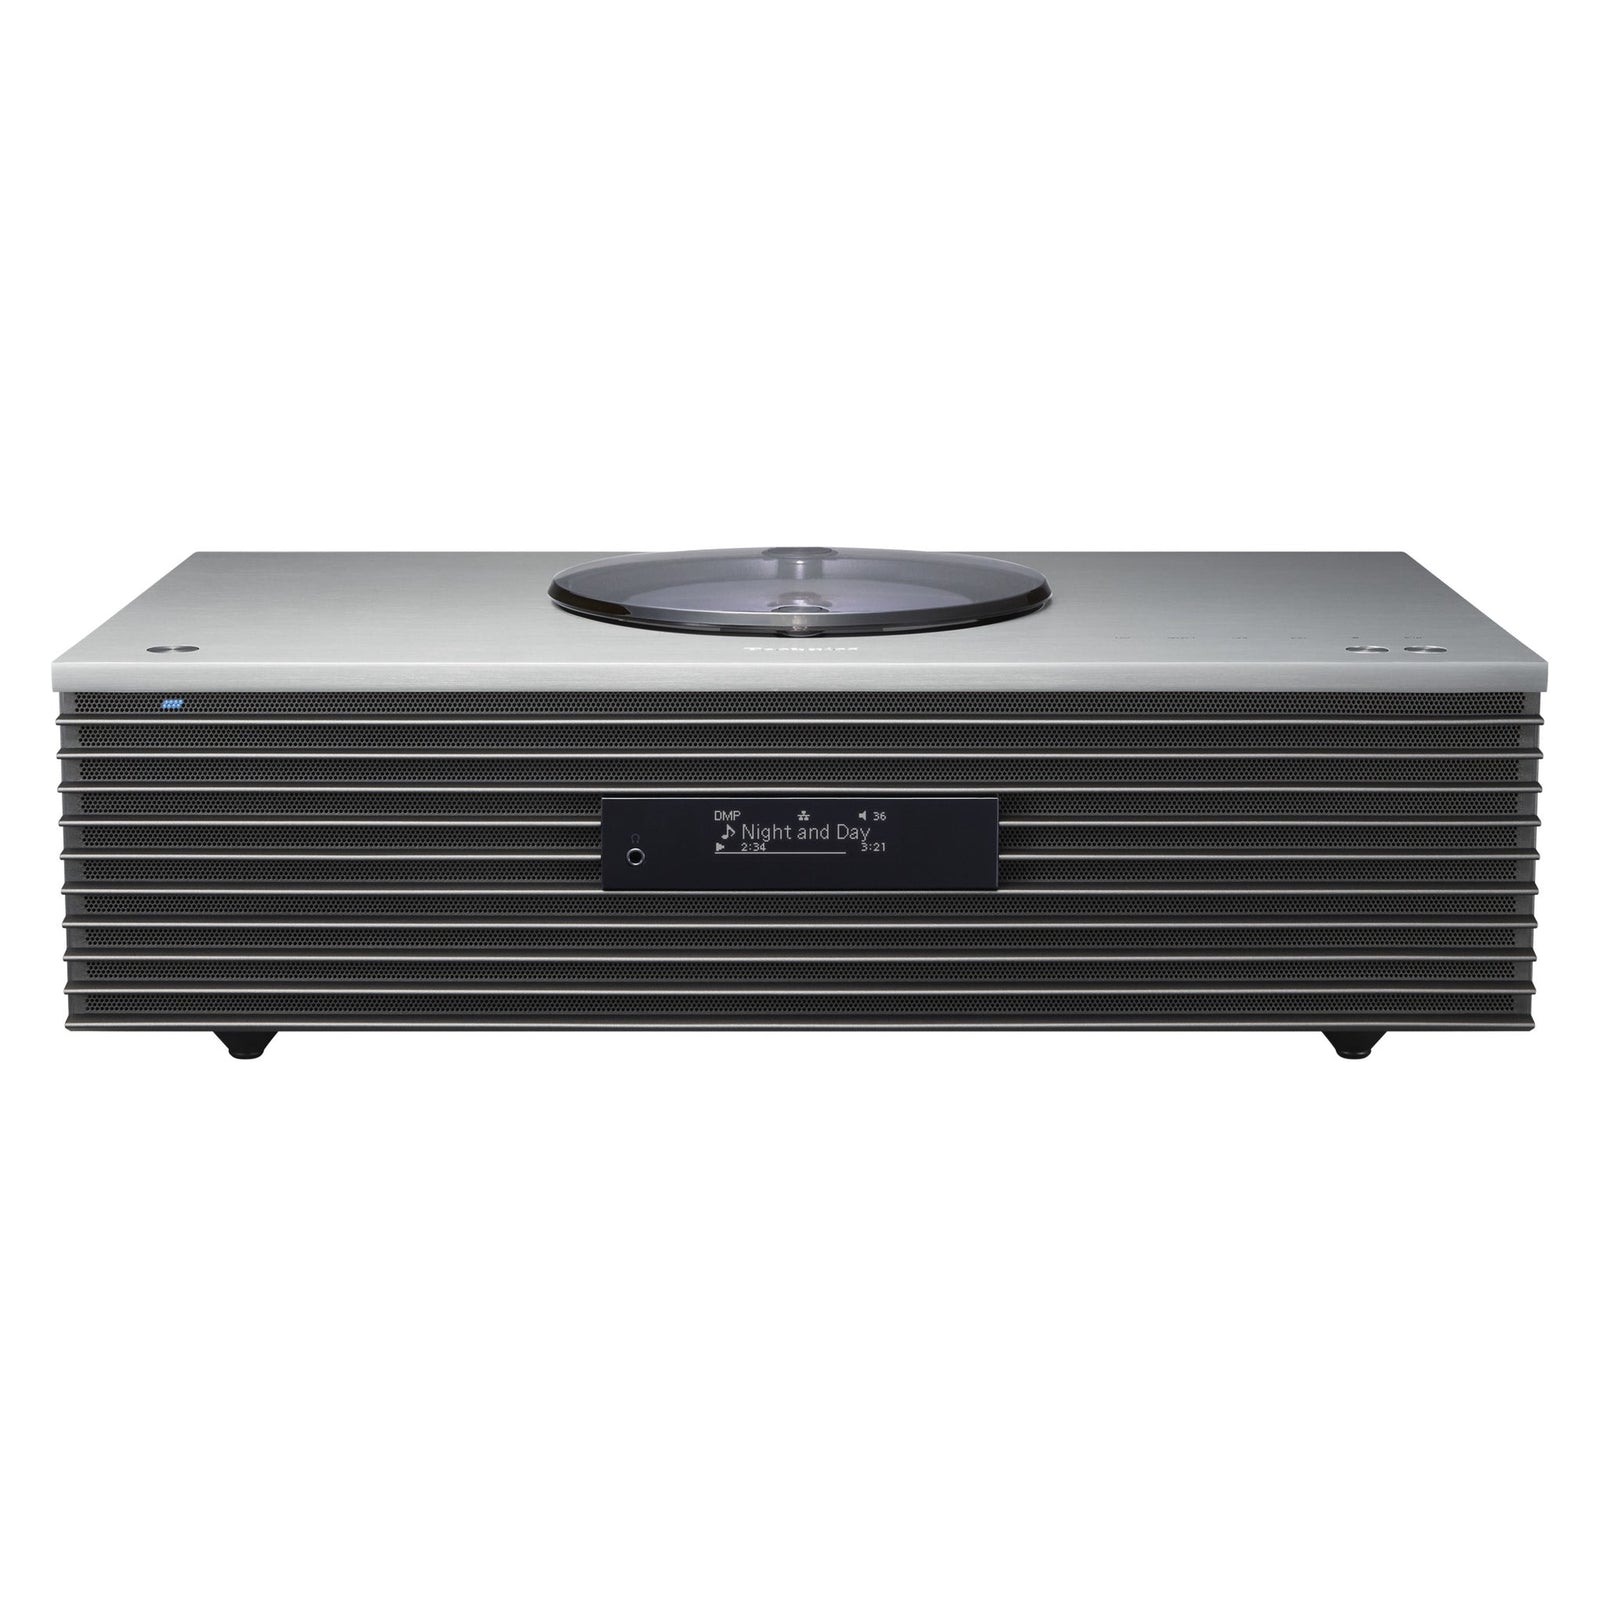 The Technics SC-C70MK2 Ottava Premium-Class All-in-One Compact Stereo System features a newly-adjusted woofer and tweeter and a new acoustic lens for audio with incredible richness, scale, and detail. Spacetune™ Auto optimizes sound according to the position of the unit. Bluetooth and Wifi compatible for internet radio, streaming platforms, Google Assistant, and built-in Google Chromecast.